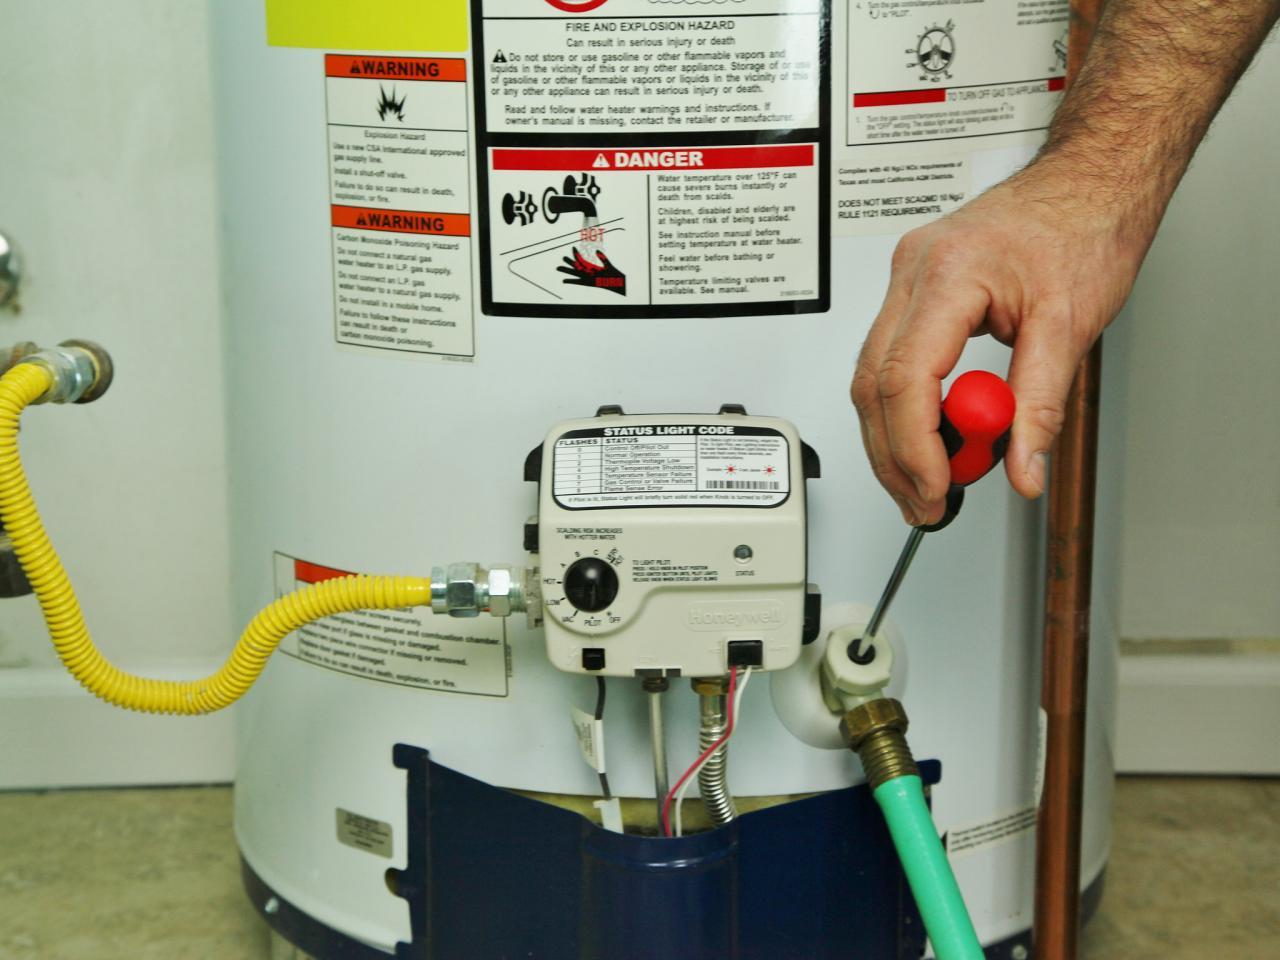 How to Light the Pilot Light for a Water Heater - A Fix For When